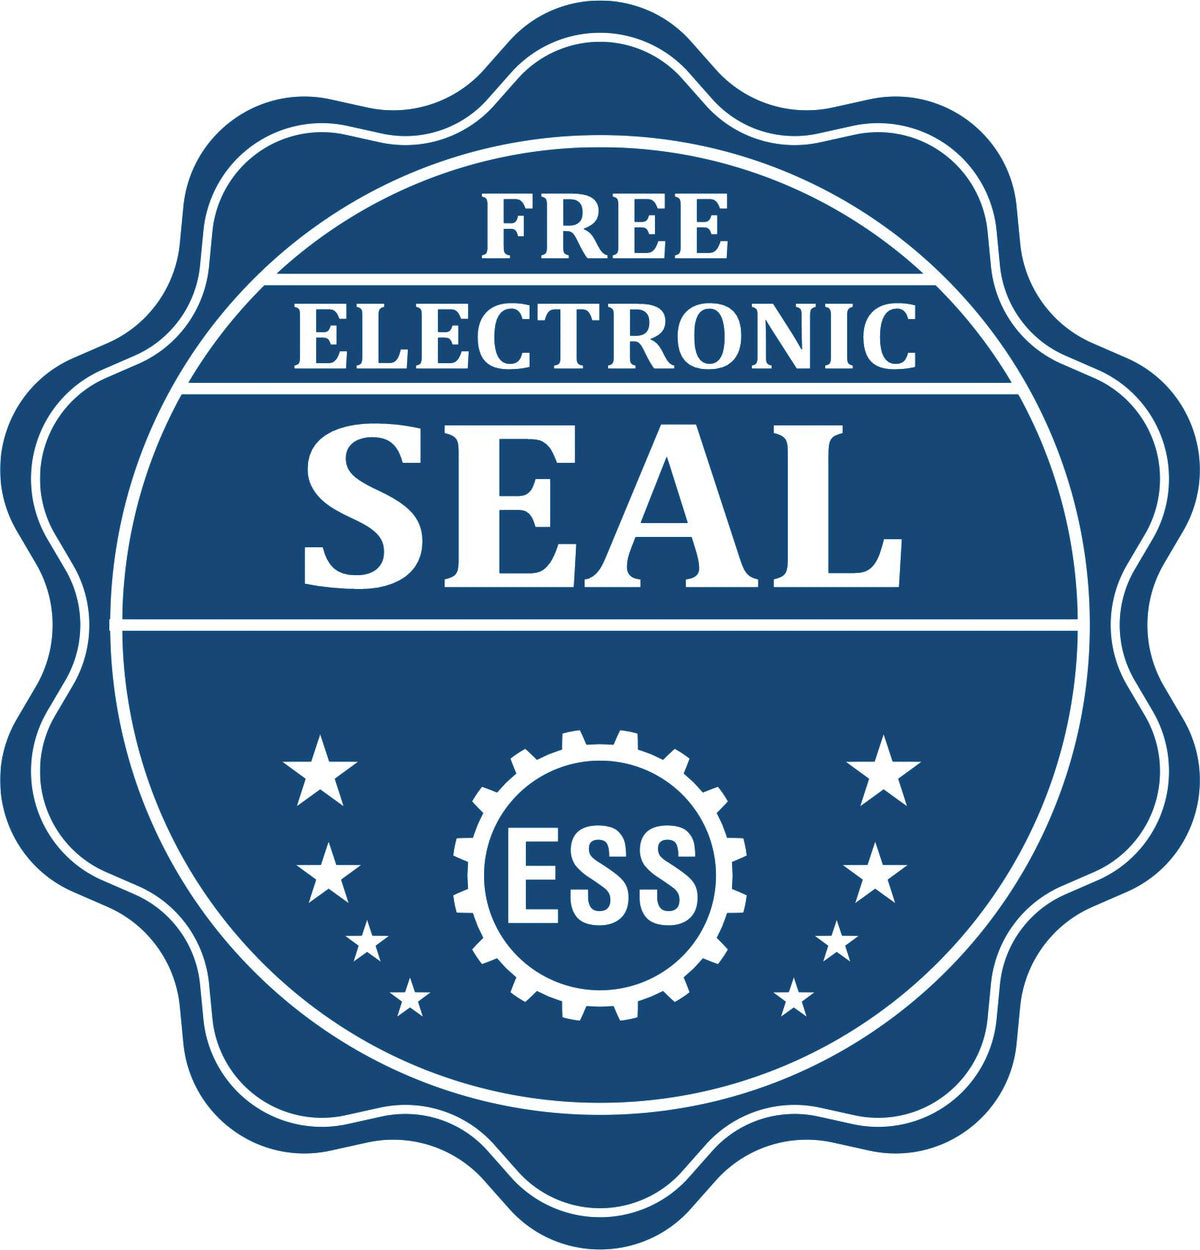 A badge showing a free electronic seal for the Gift New York Geologist Seal with stars and the ESS gear on the emblem.